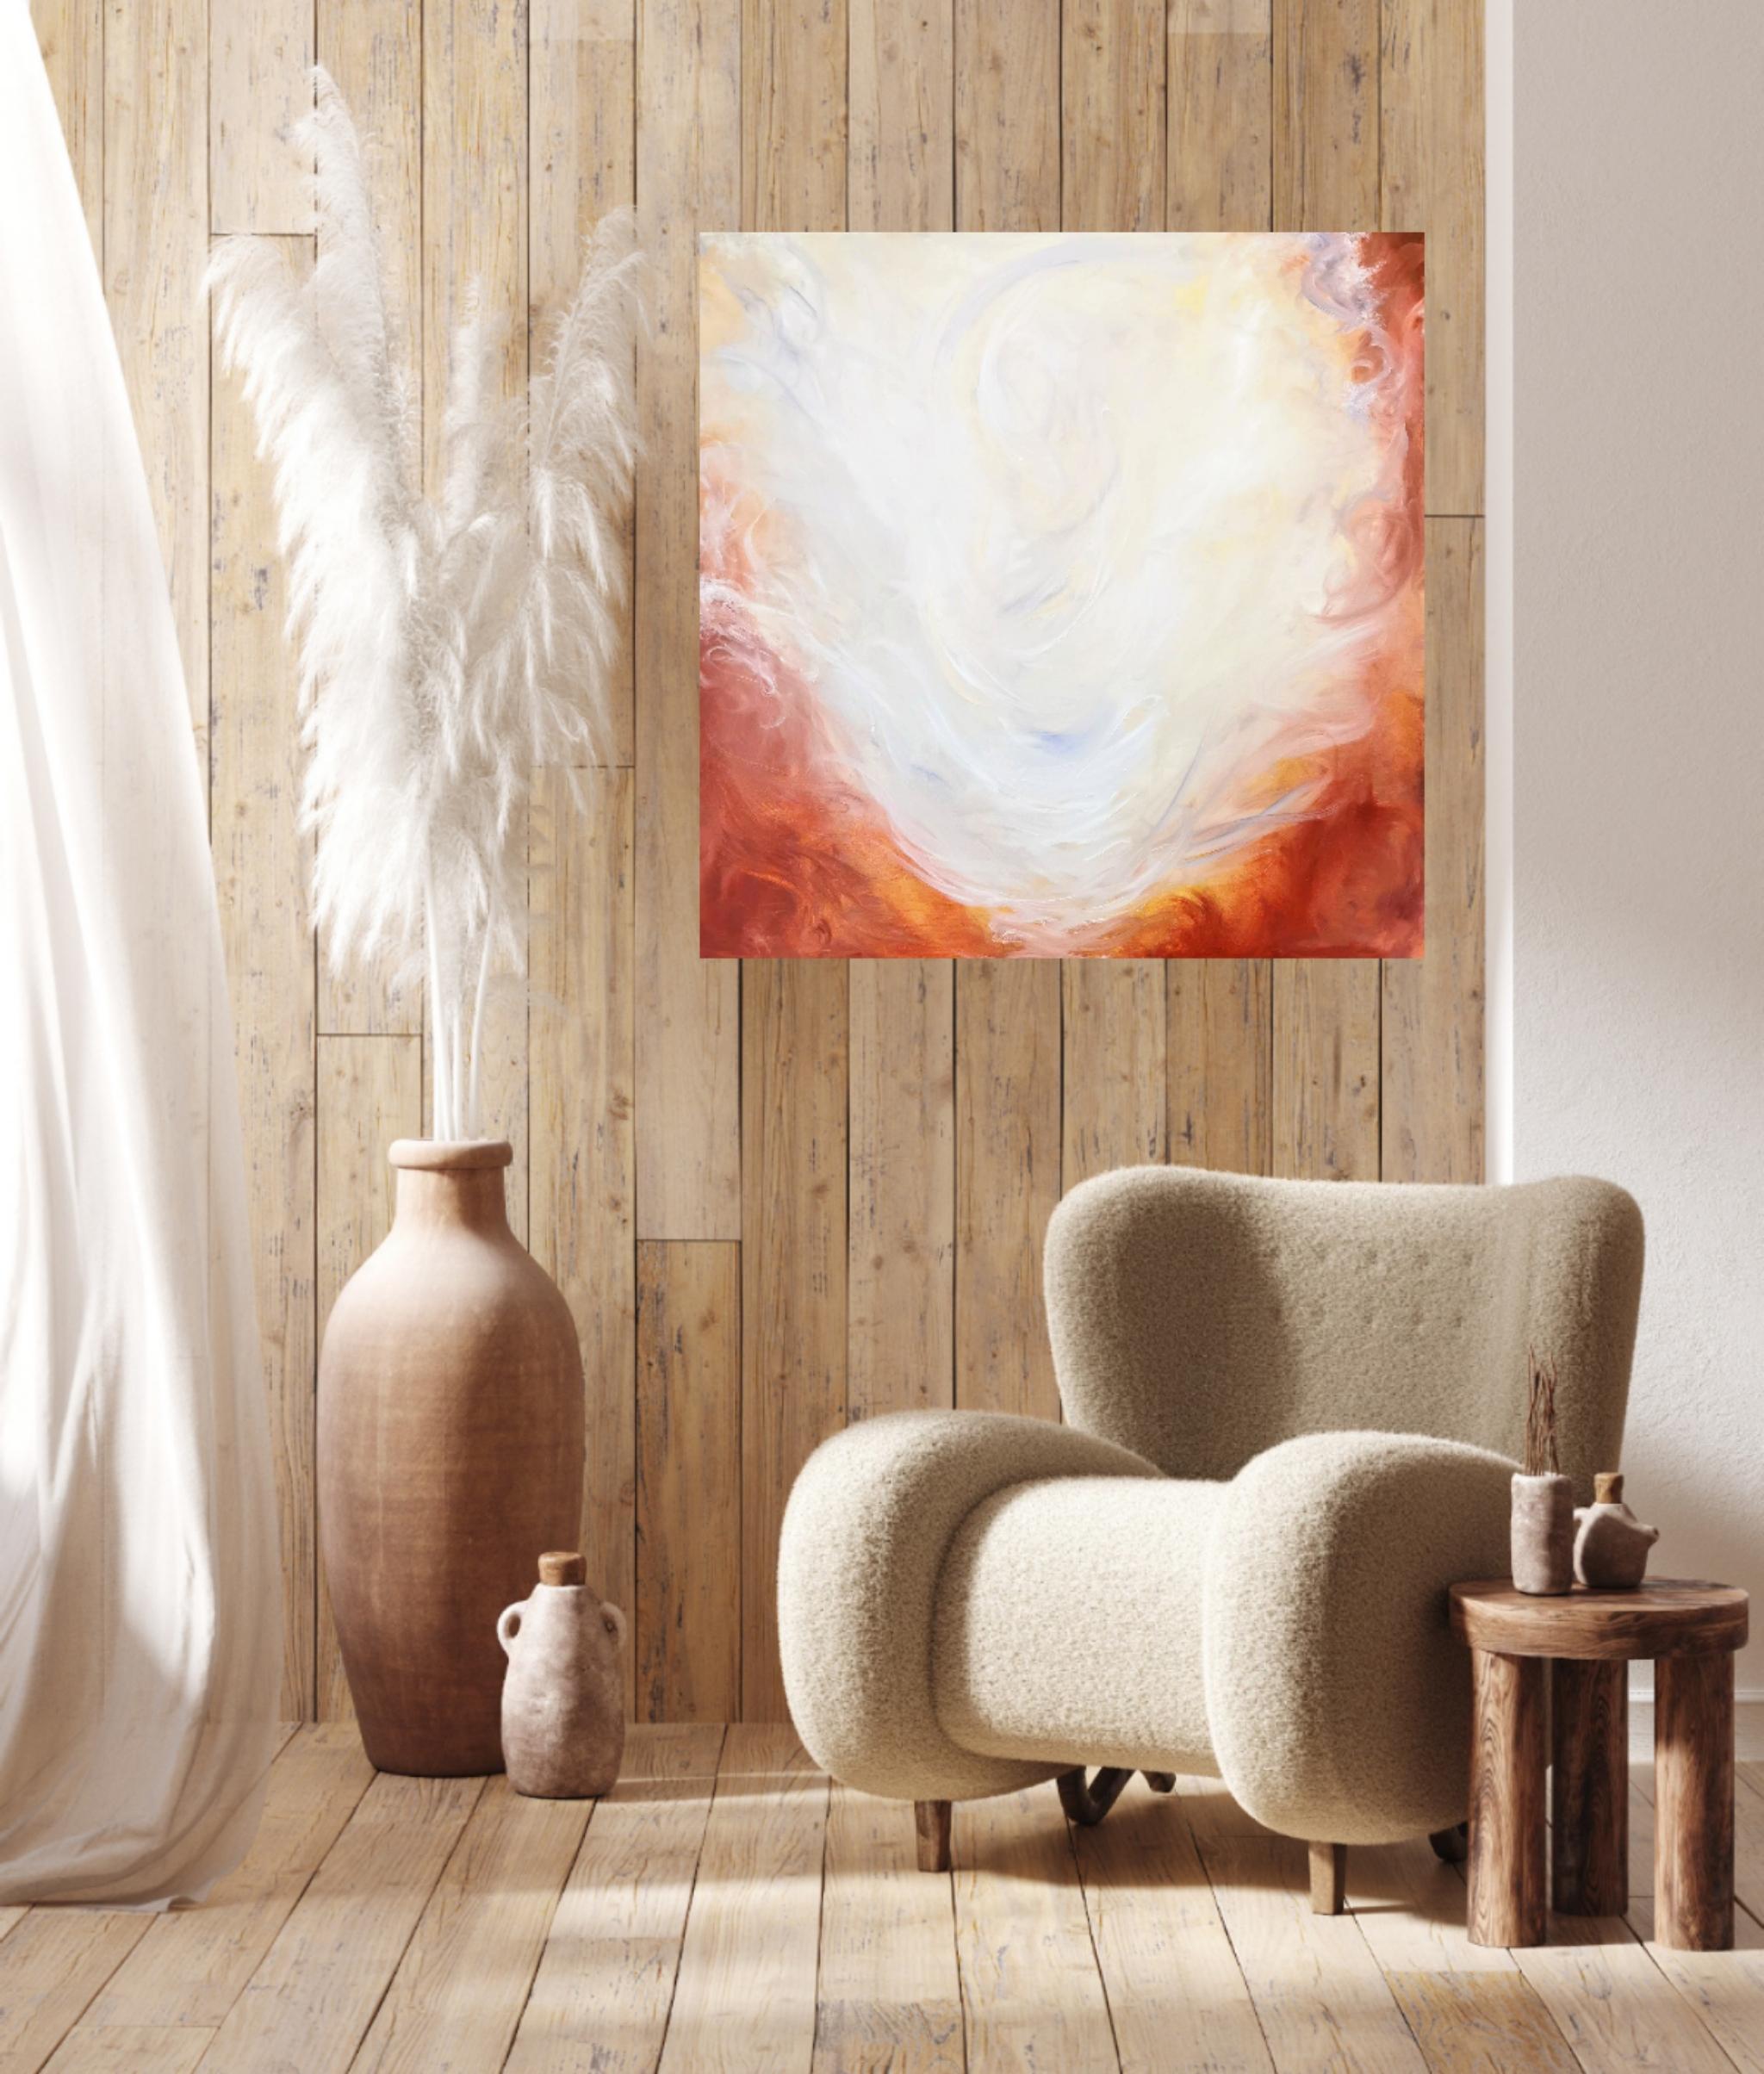 Life everlasting - Abstract expressionist red, orange, and white painting - Painting by Jennifer L. Baker